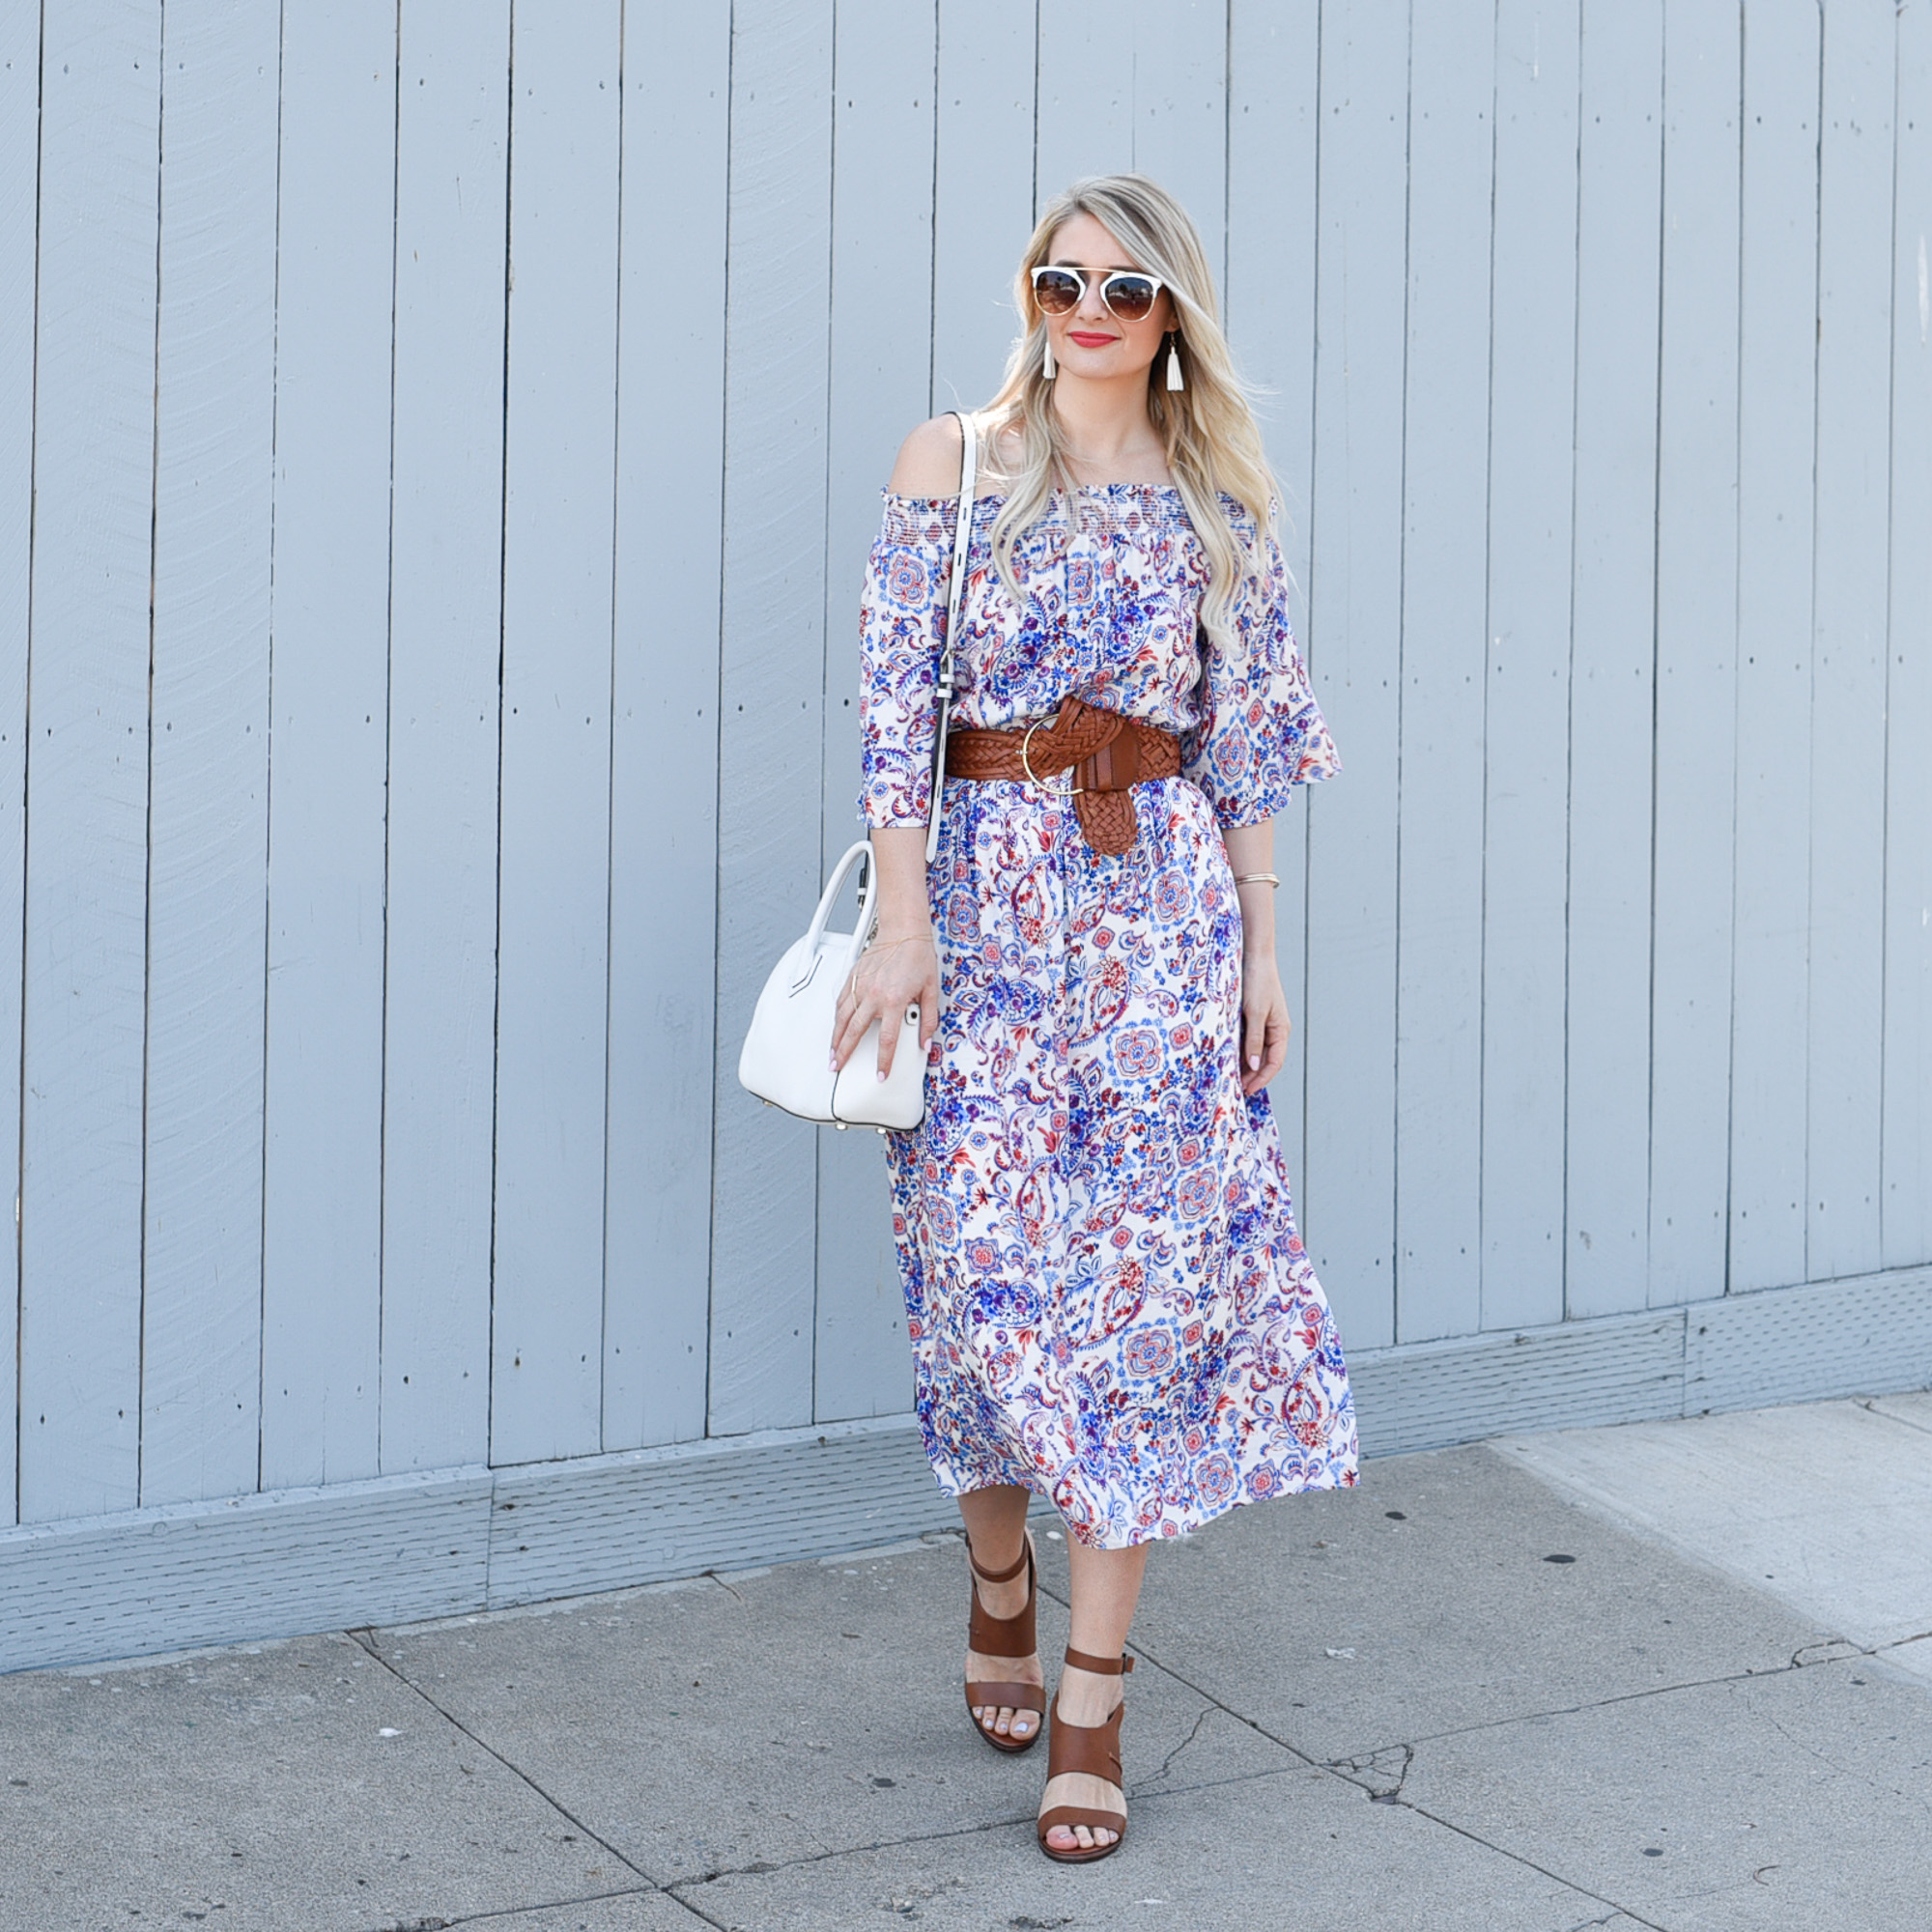 Printed frock that is perfect for summer!